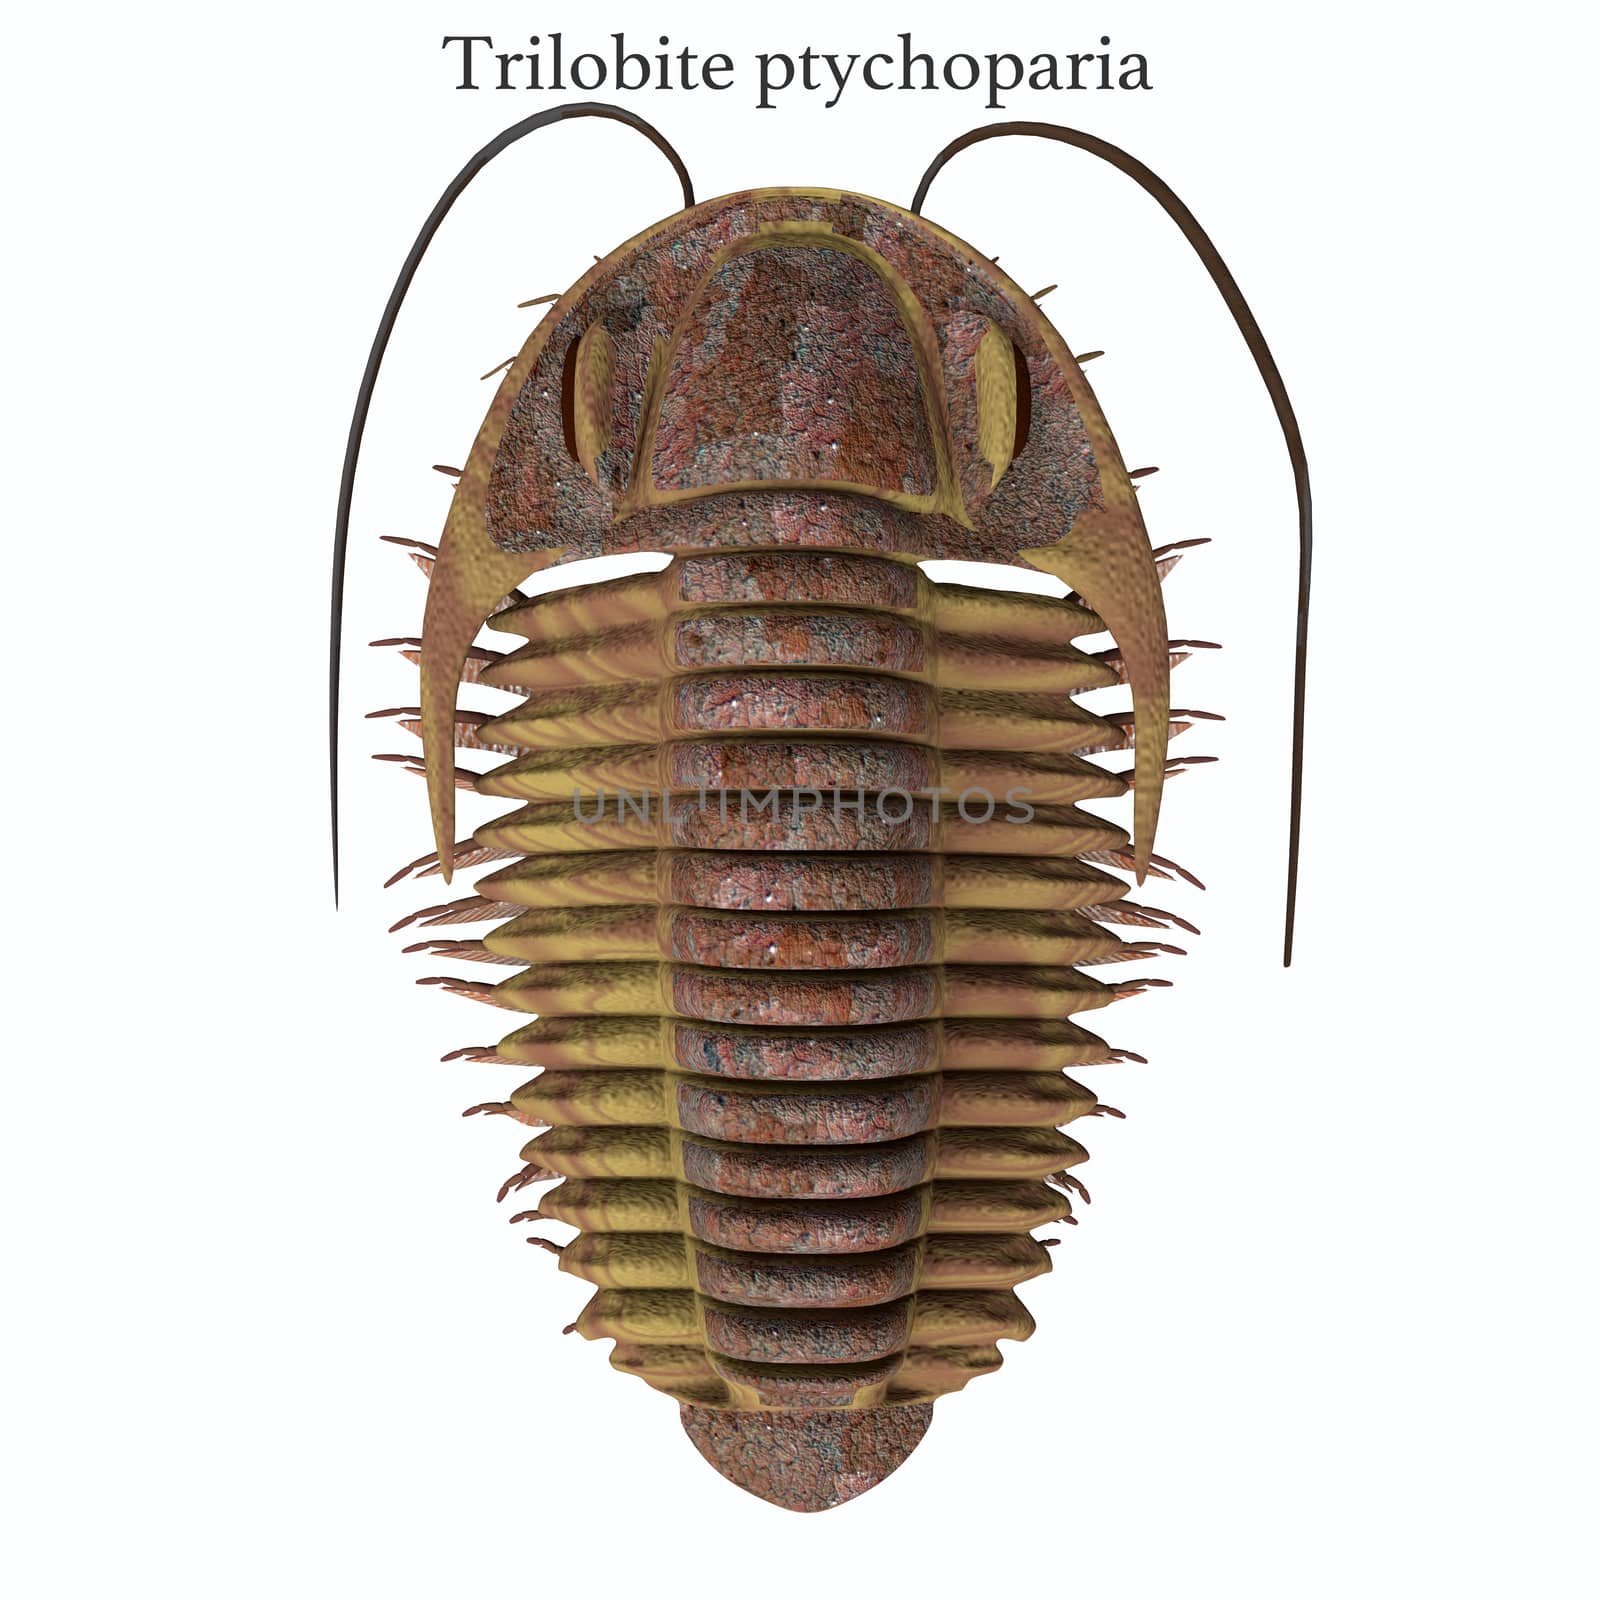 Trilobite ptychoparia animal lived in the Cambrian seas of Eurasia and North America.